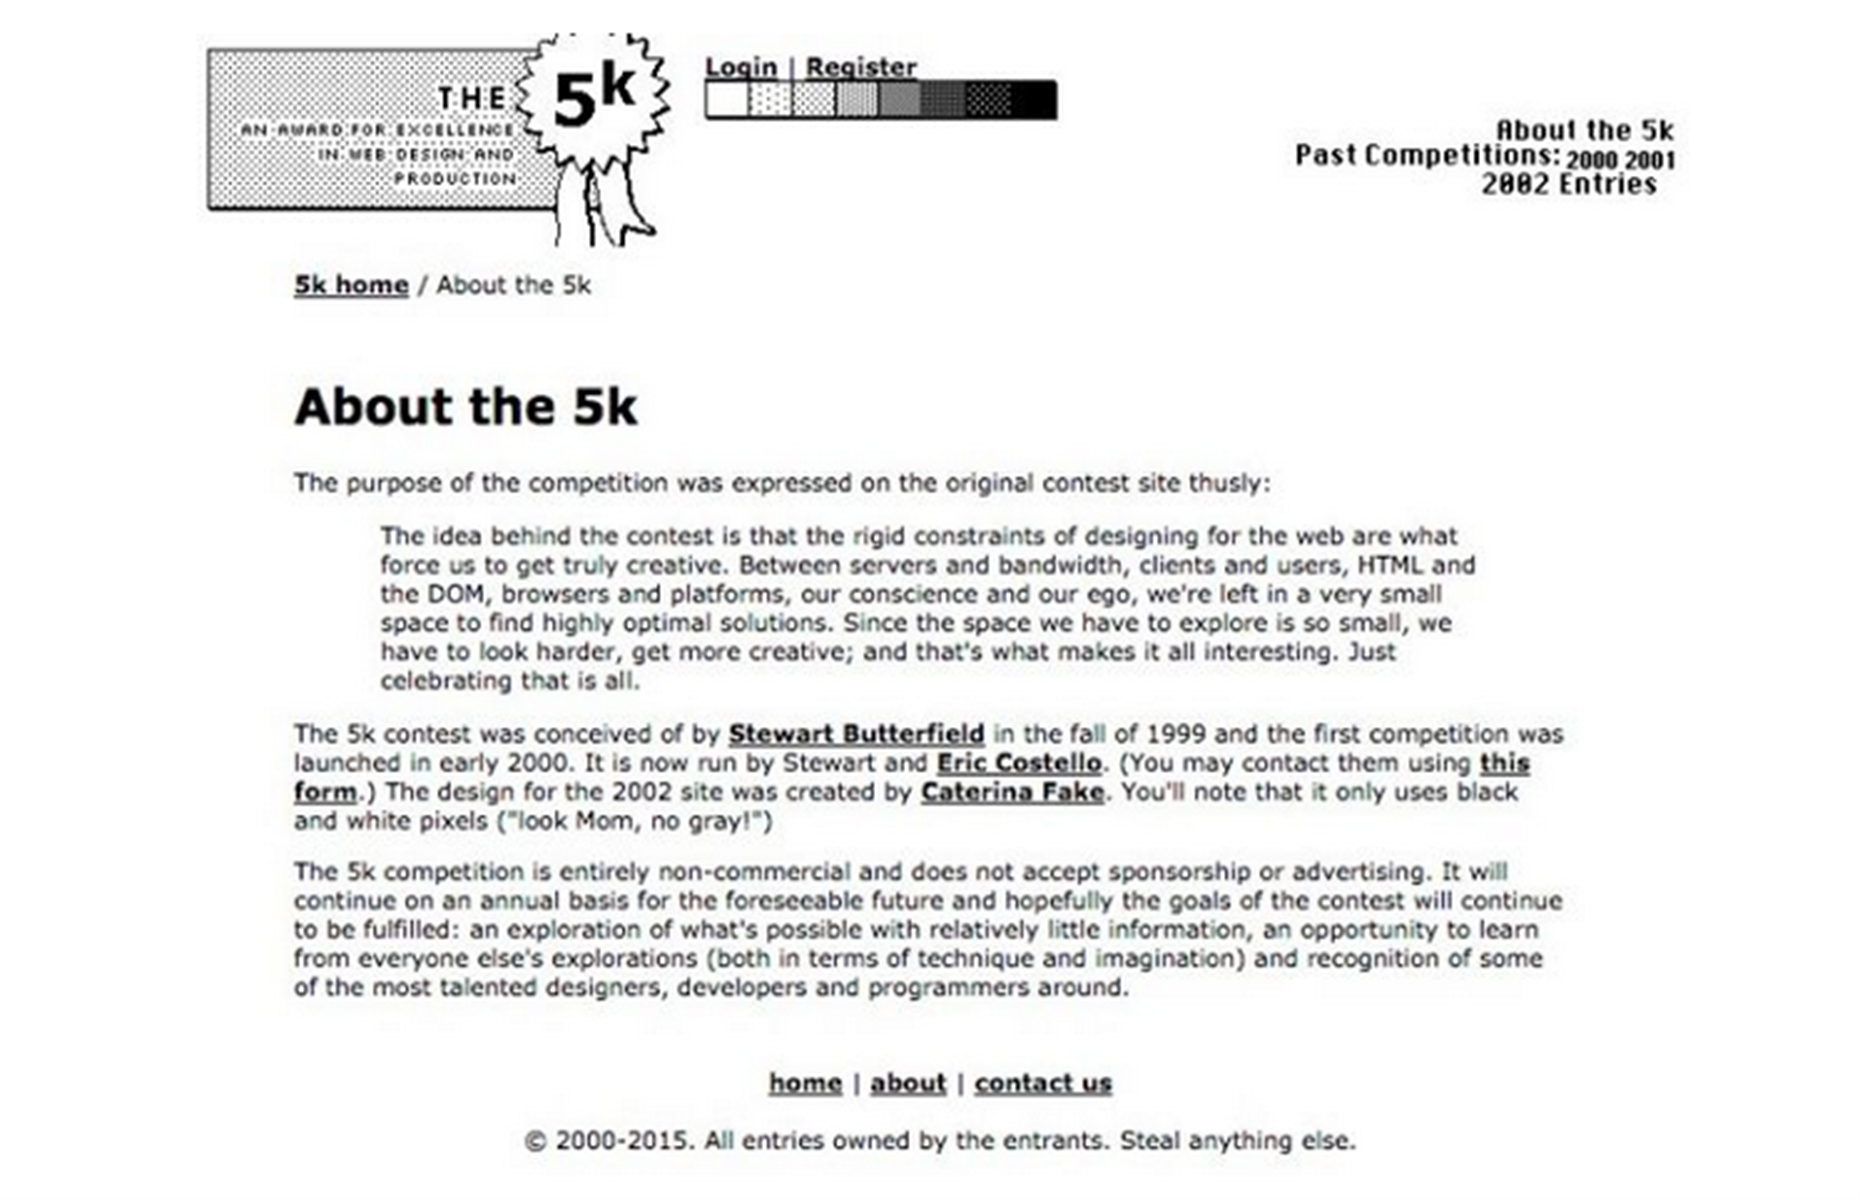 The 5k contest